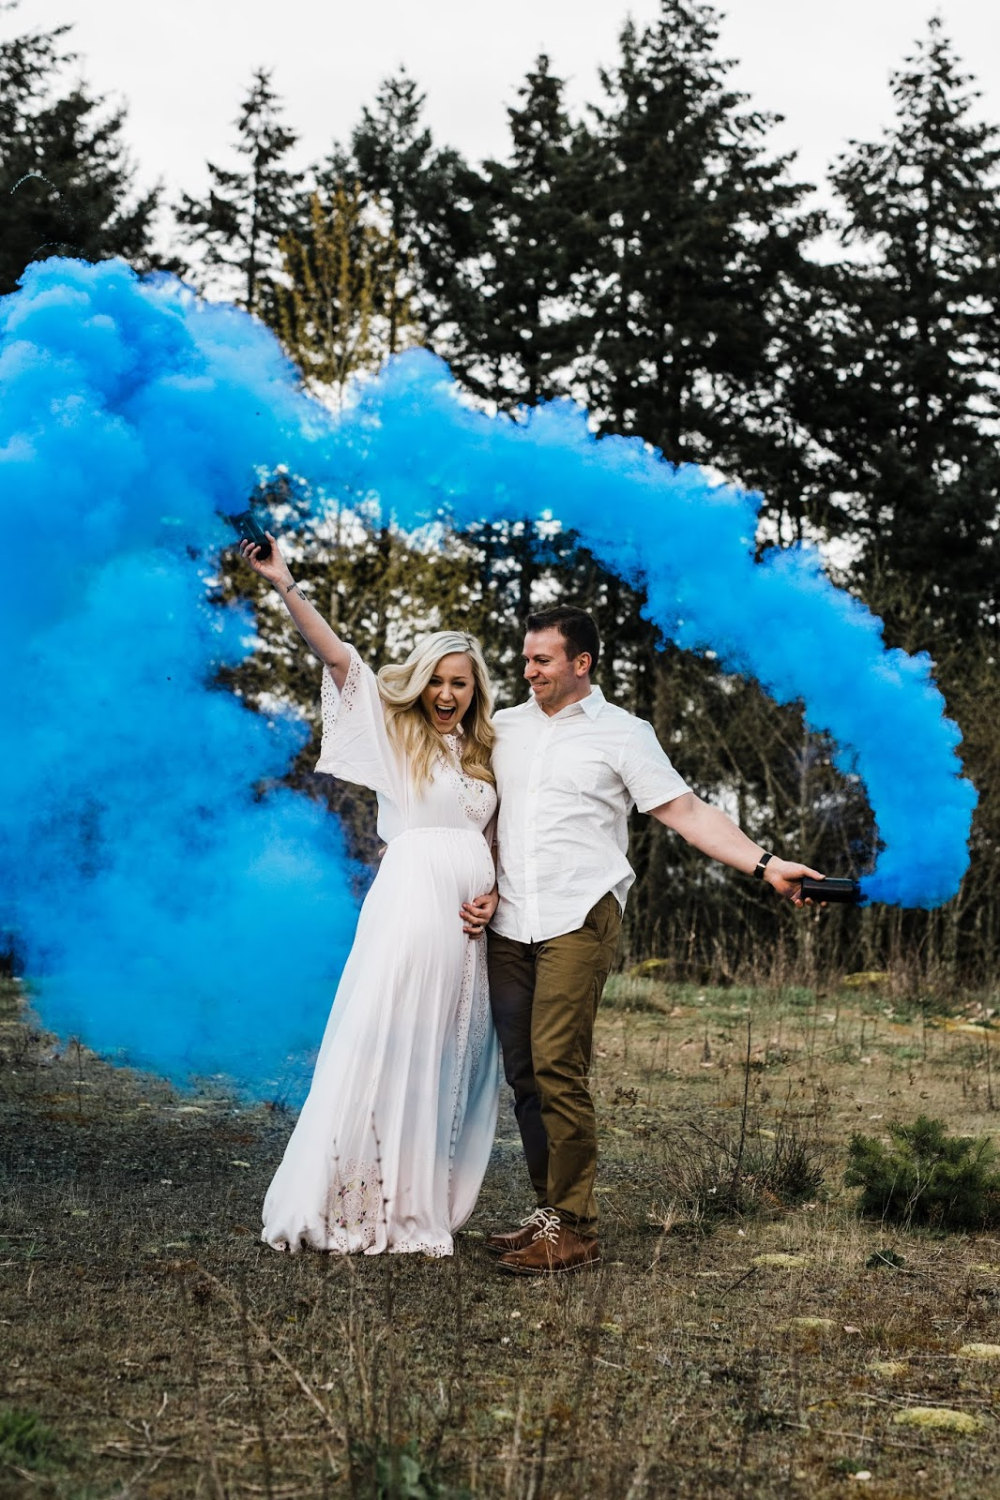 20+ Exciting and Creative Twin Baby Gender Reveal Ideas